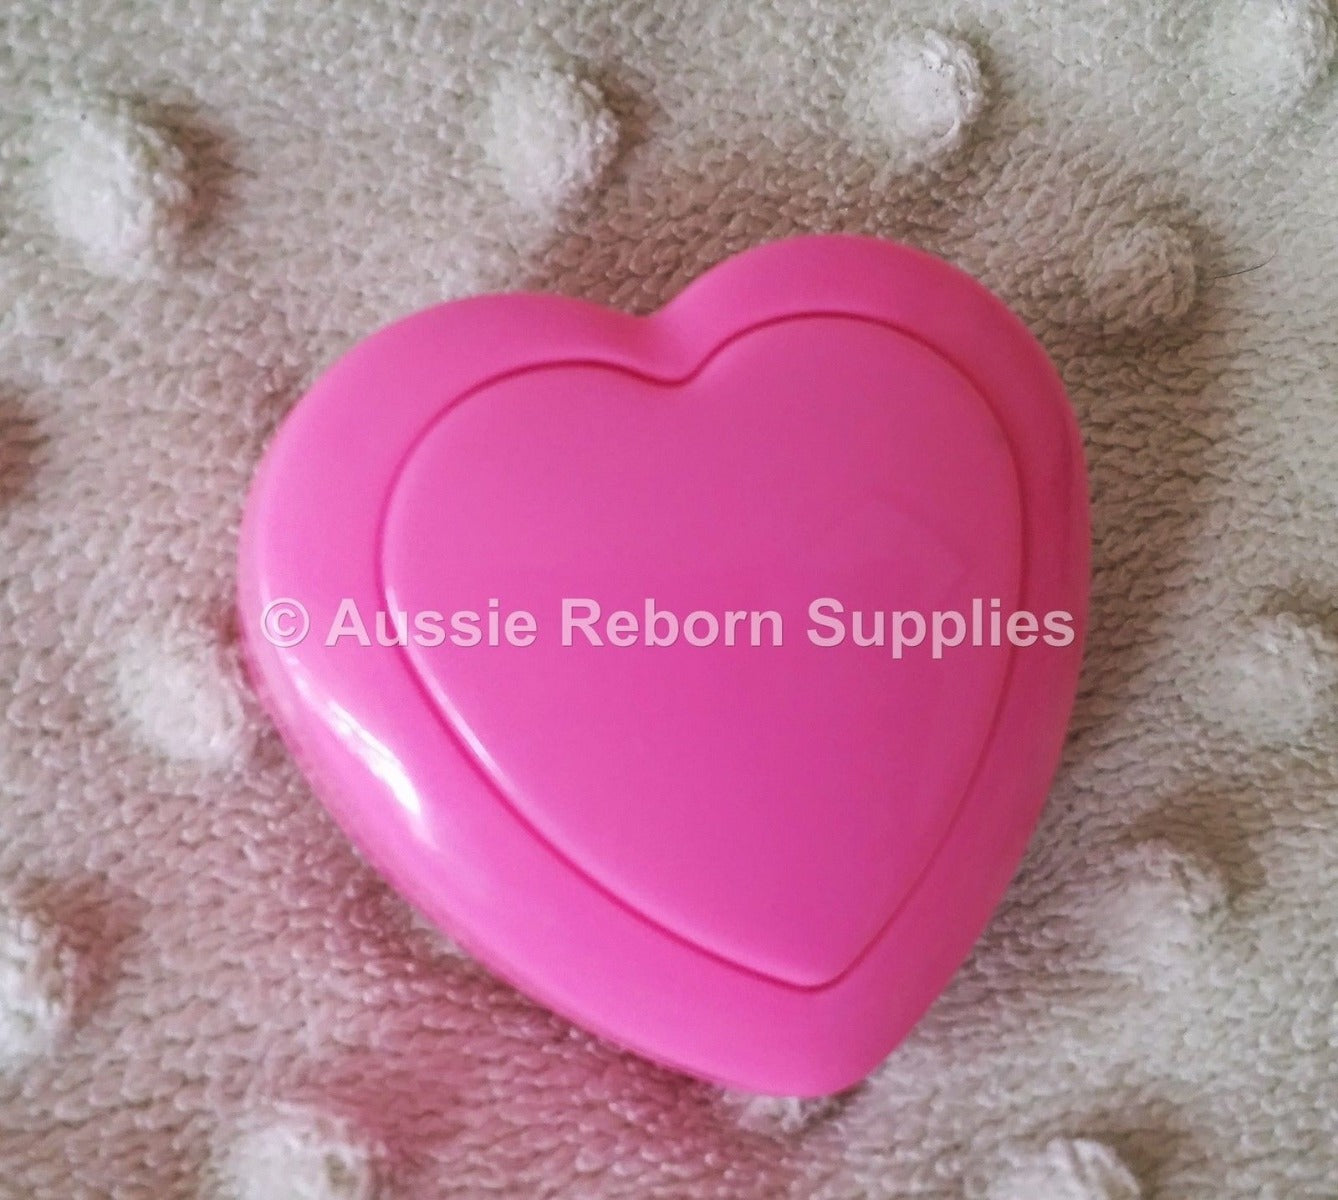 Reborn Baby Doll Beating Heart, Bring your baby to life Supplies